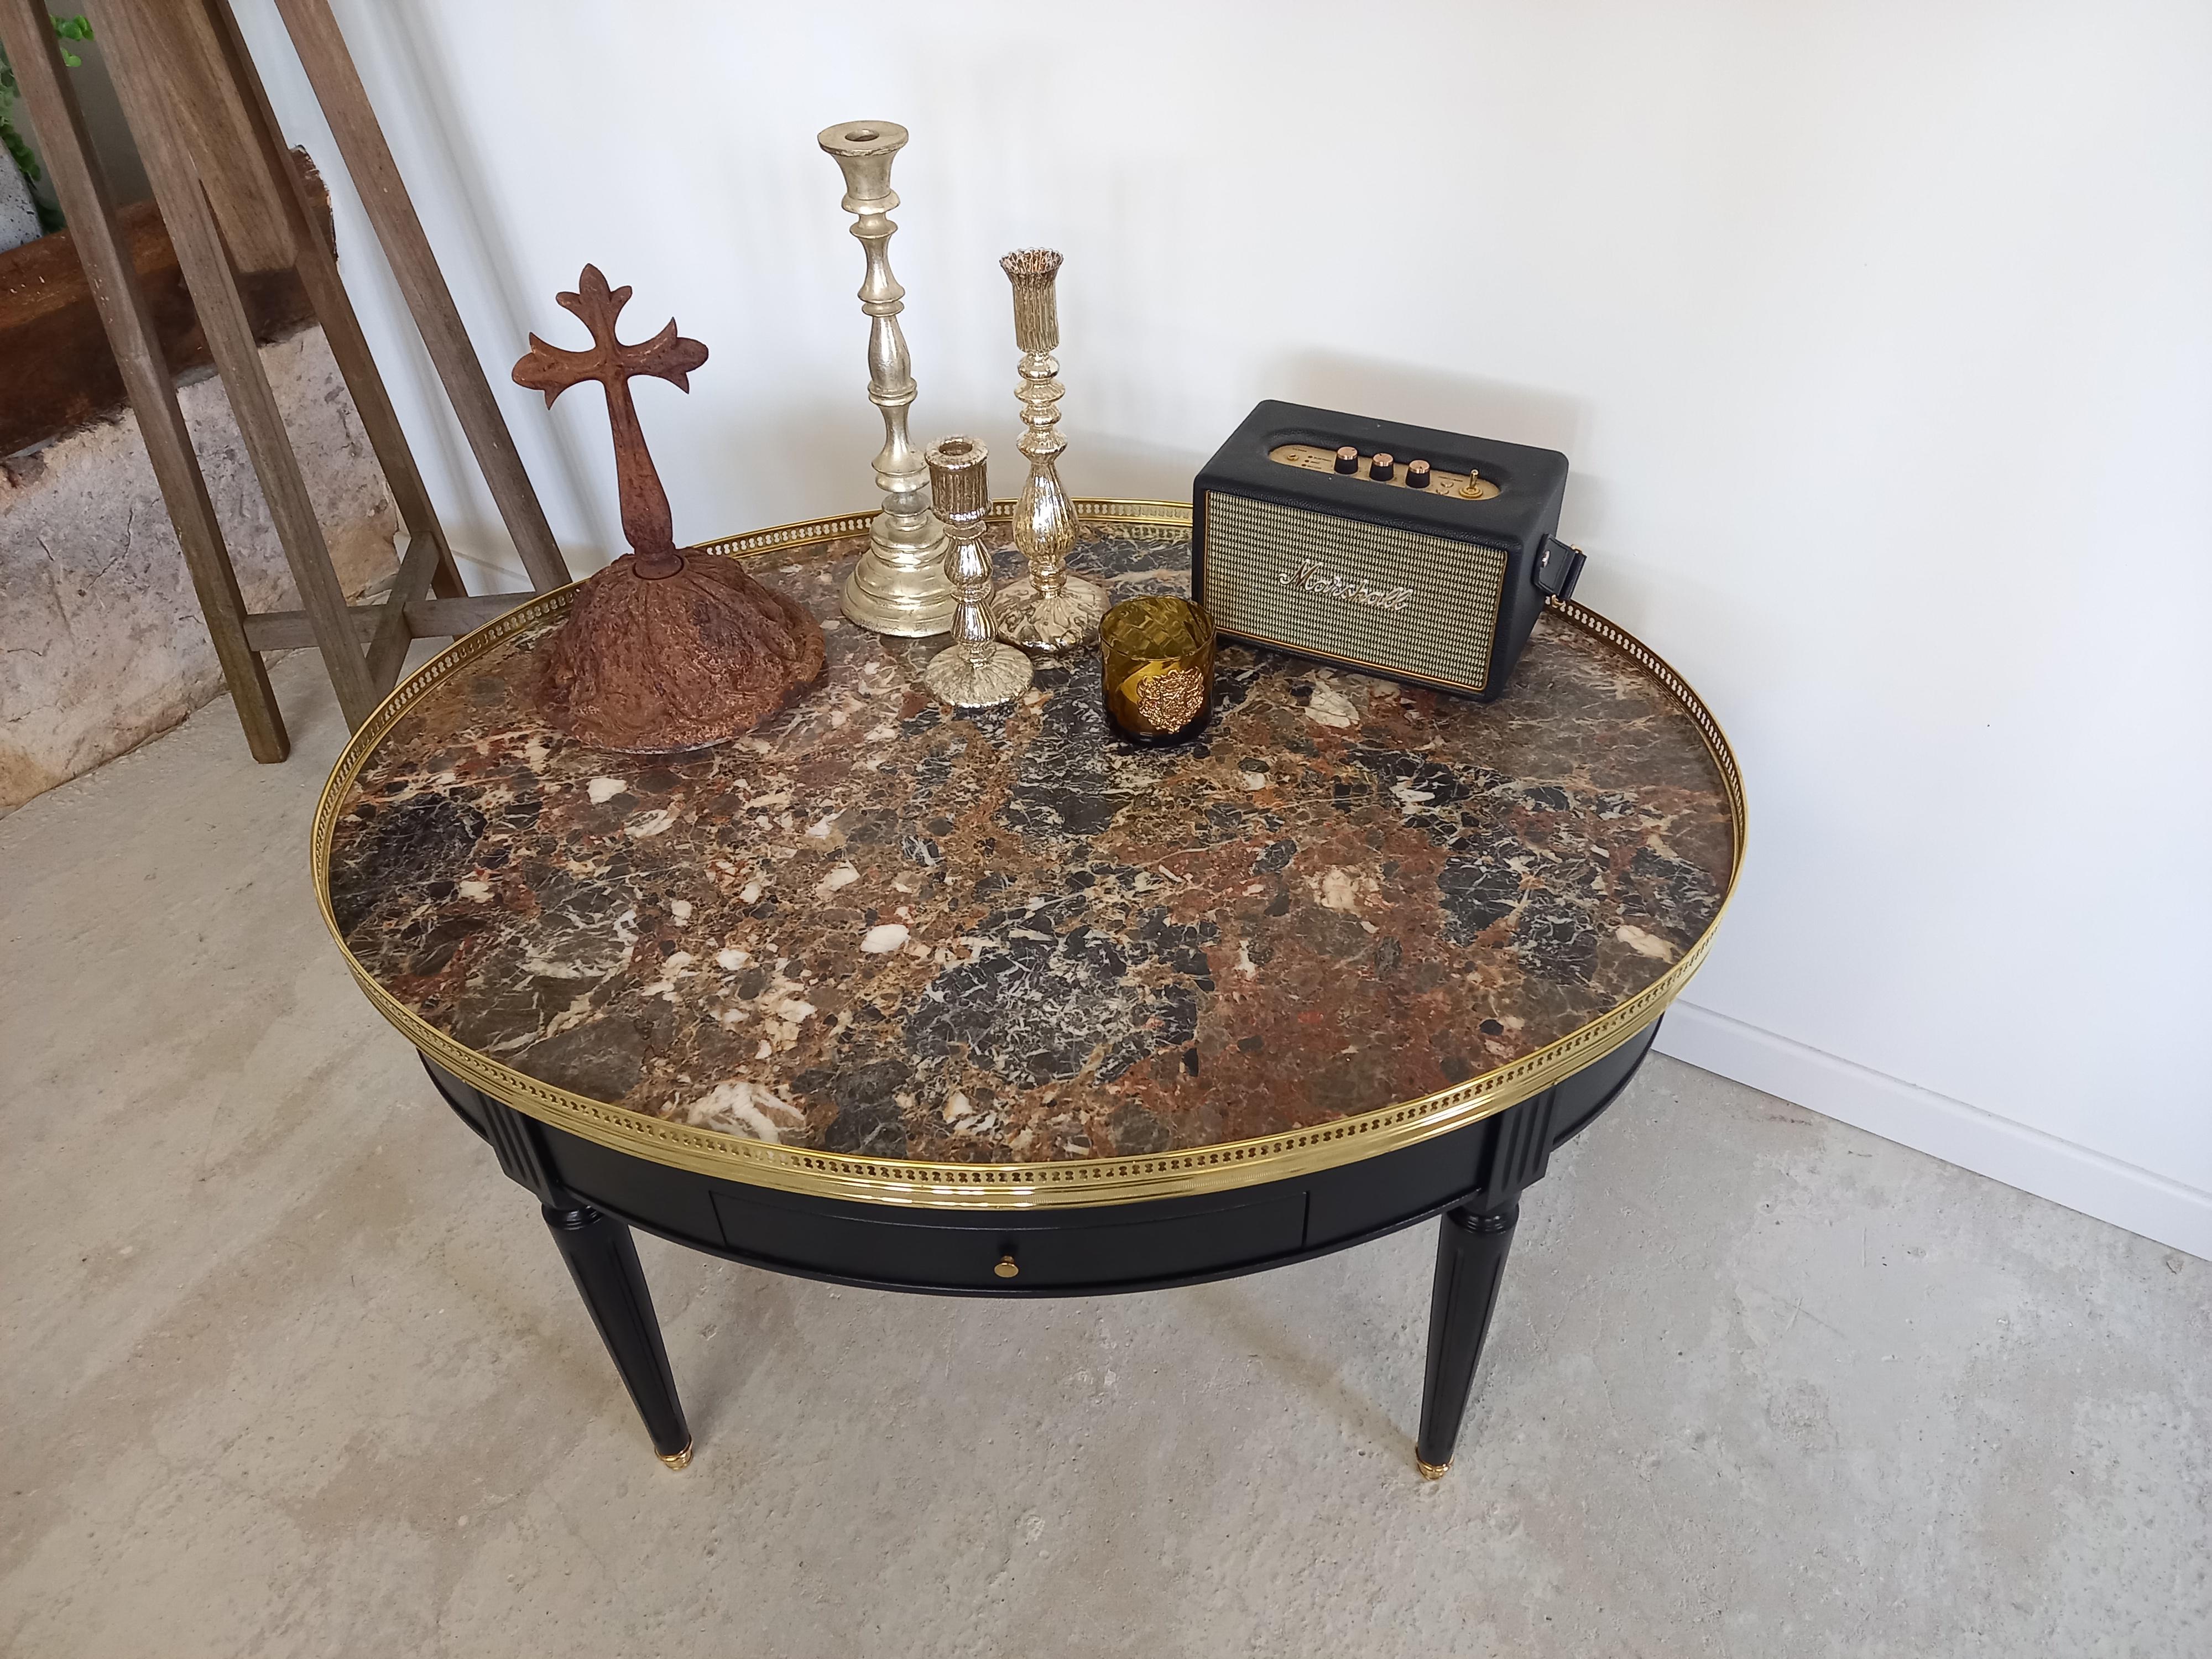 French Louis XVI style coffee table with marble top.
Brass gallery and fluted legs finished with gilt bronze clogs.
The table has a dovetail drawers and two sliding shelves in camel and gold leather.